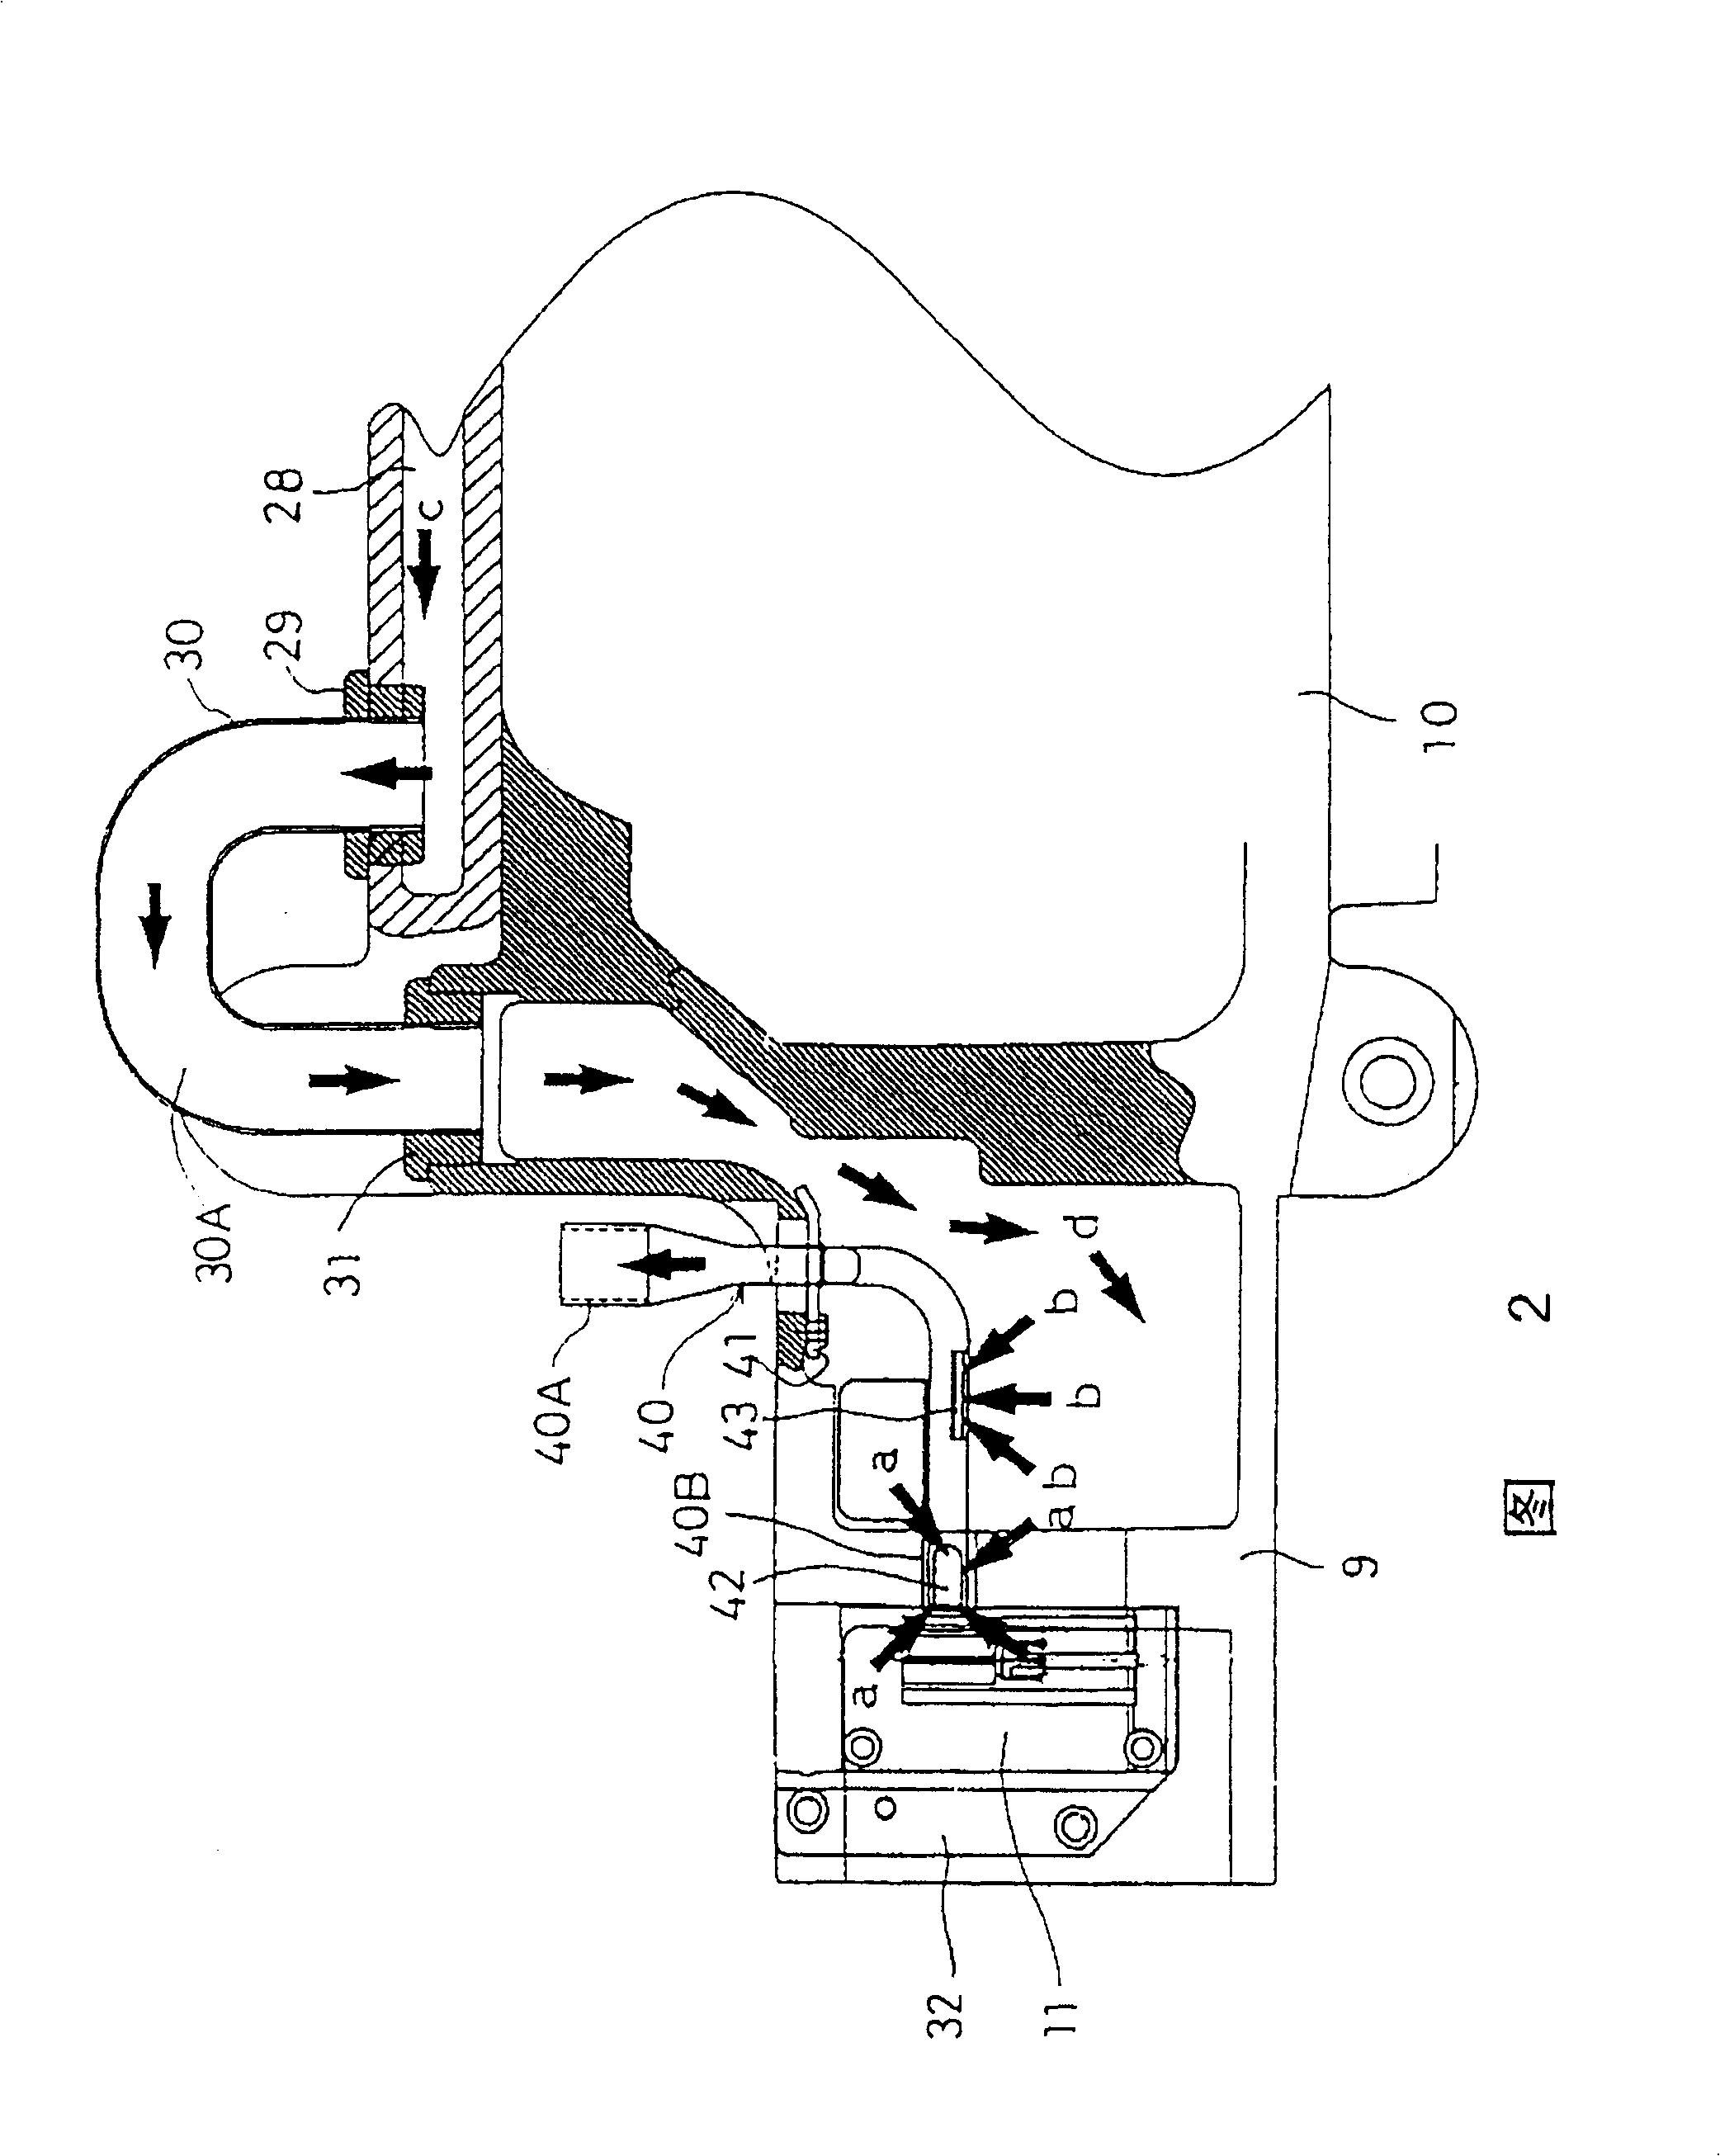 Sewing machine with dust collector